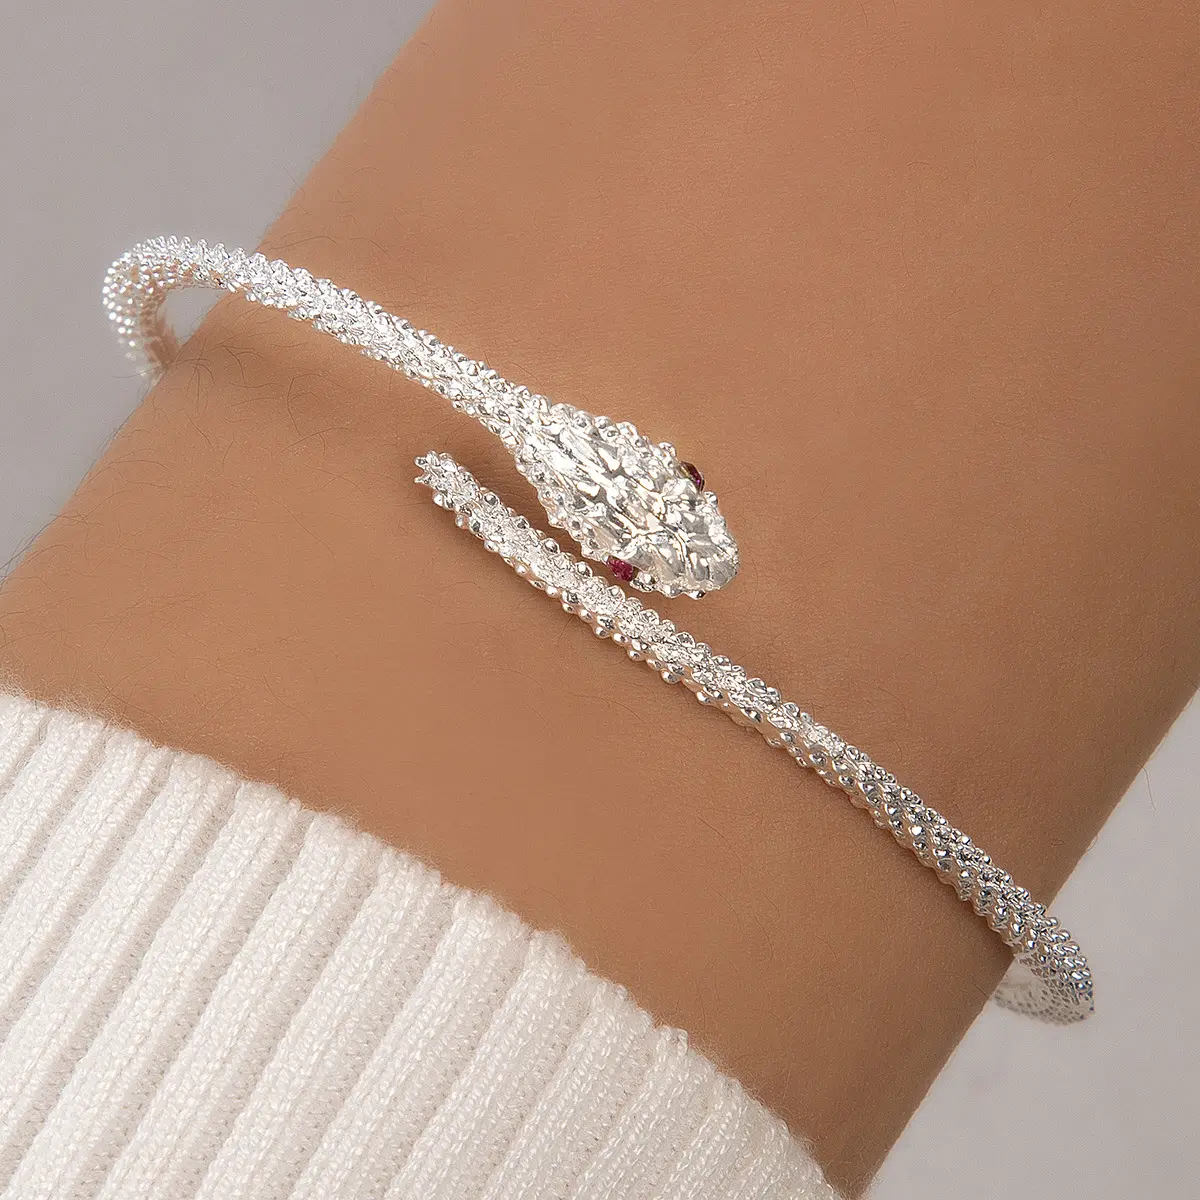 2023 Fashion Charms Bracelets Hand Made Silver Color Classic Texture Open Adjustable Cuff Women Bracelet Snake Bangles